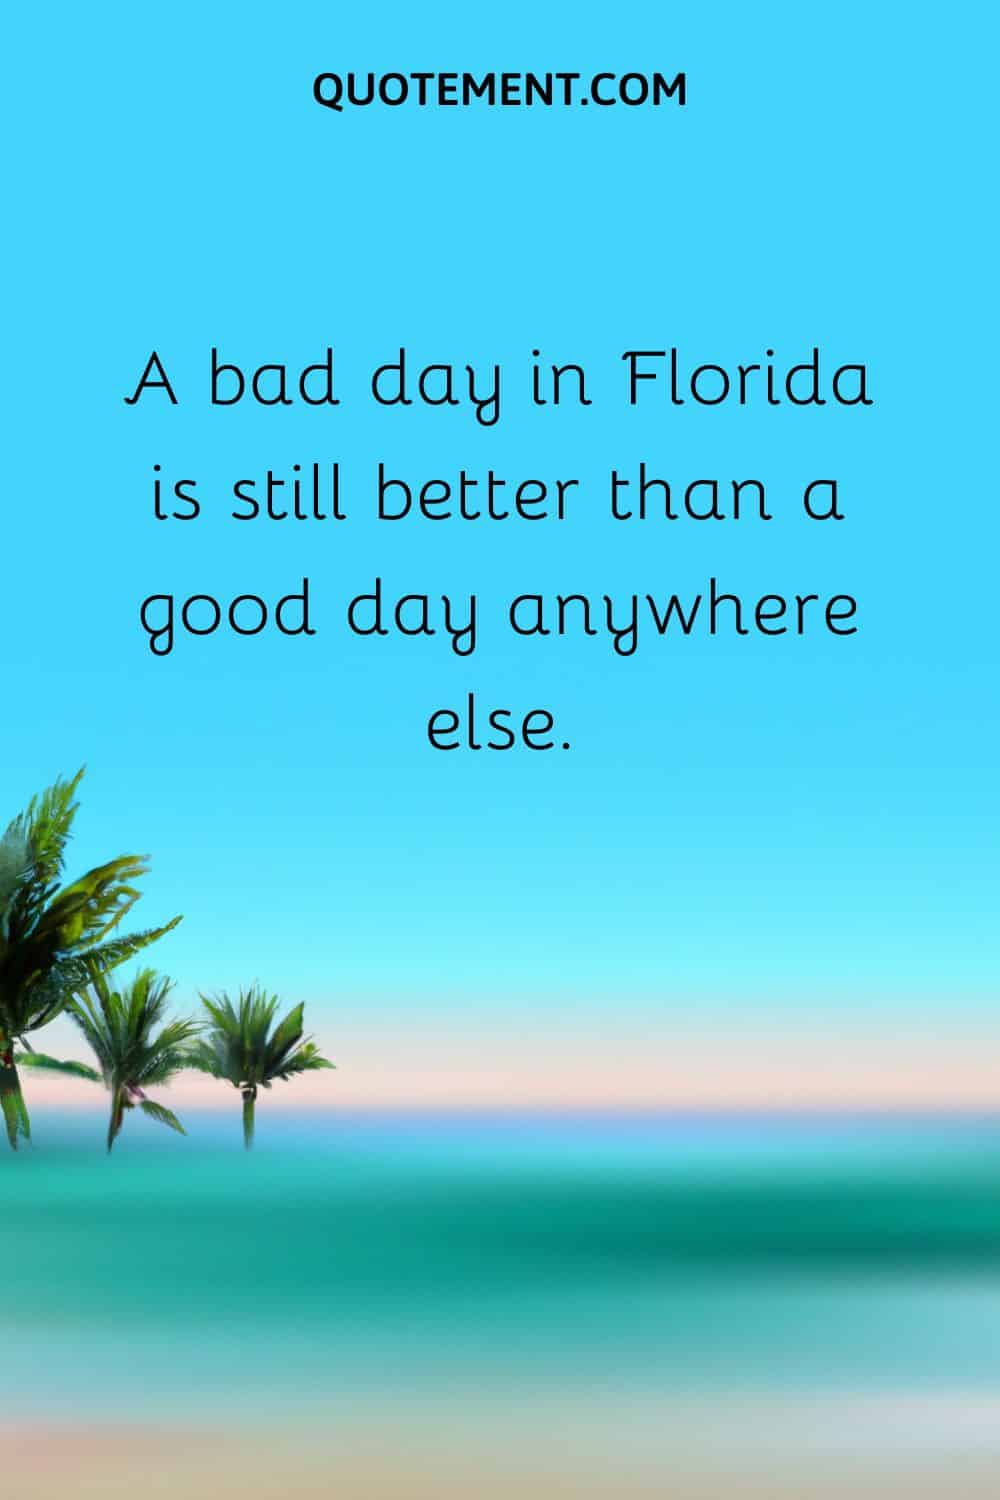  A bad day in Florida is still better than a good day anywhere else